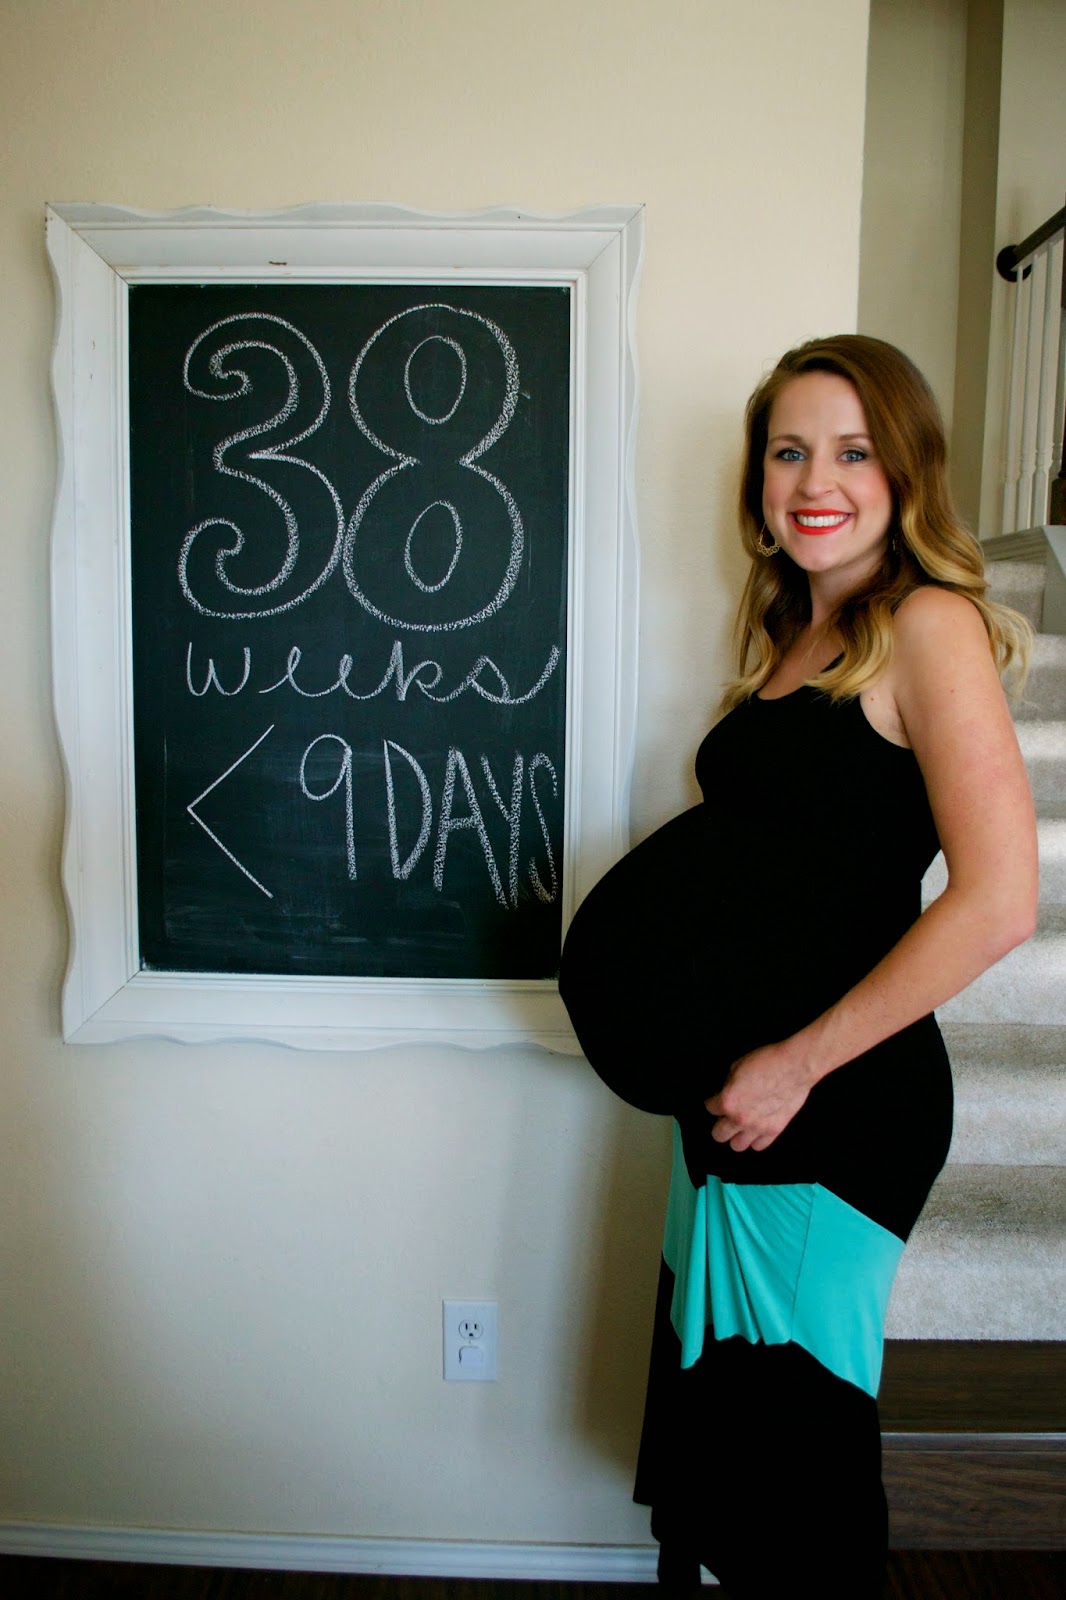 38 Weeks Pregnant with Twins: Tips, Advice & How to Prep 